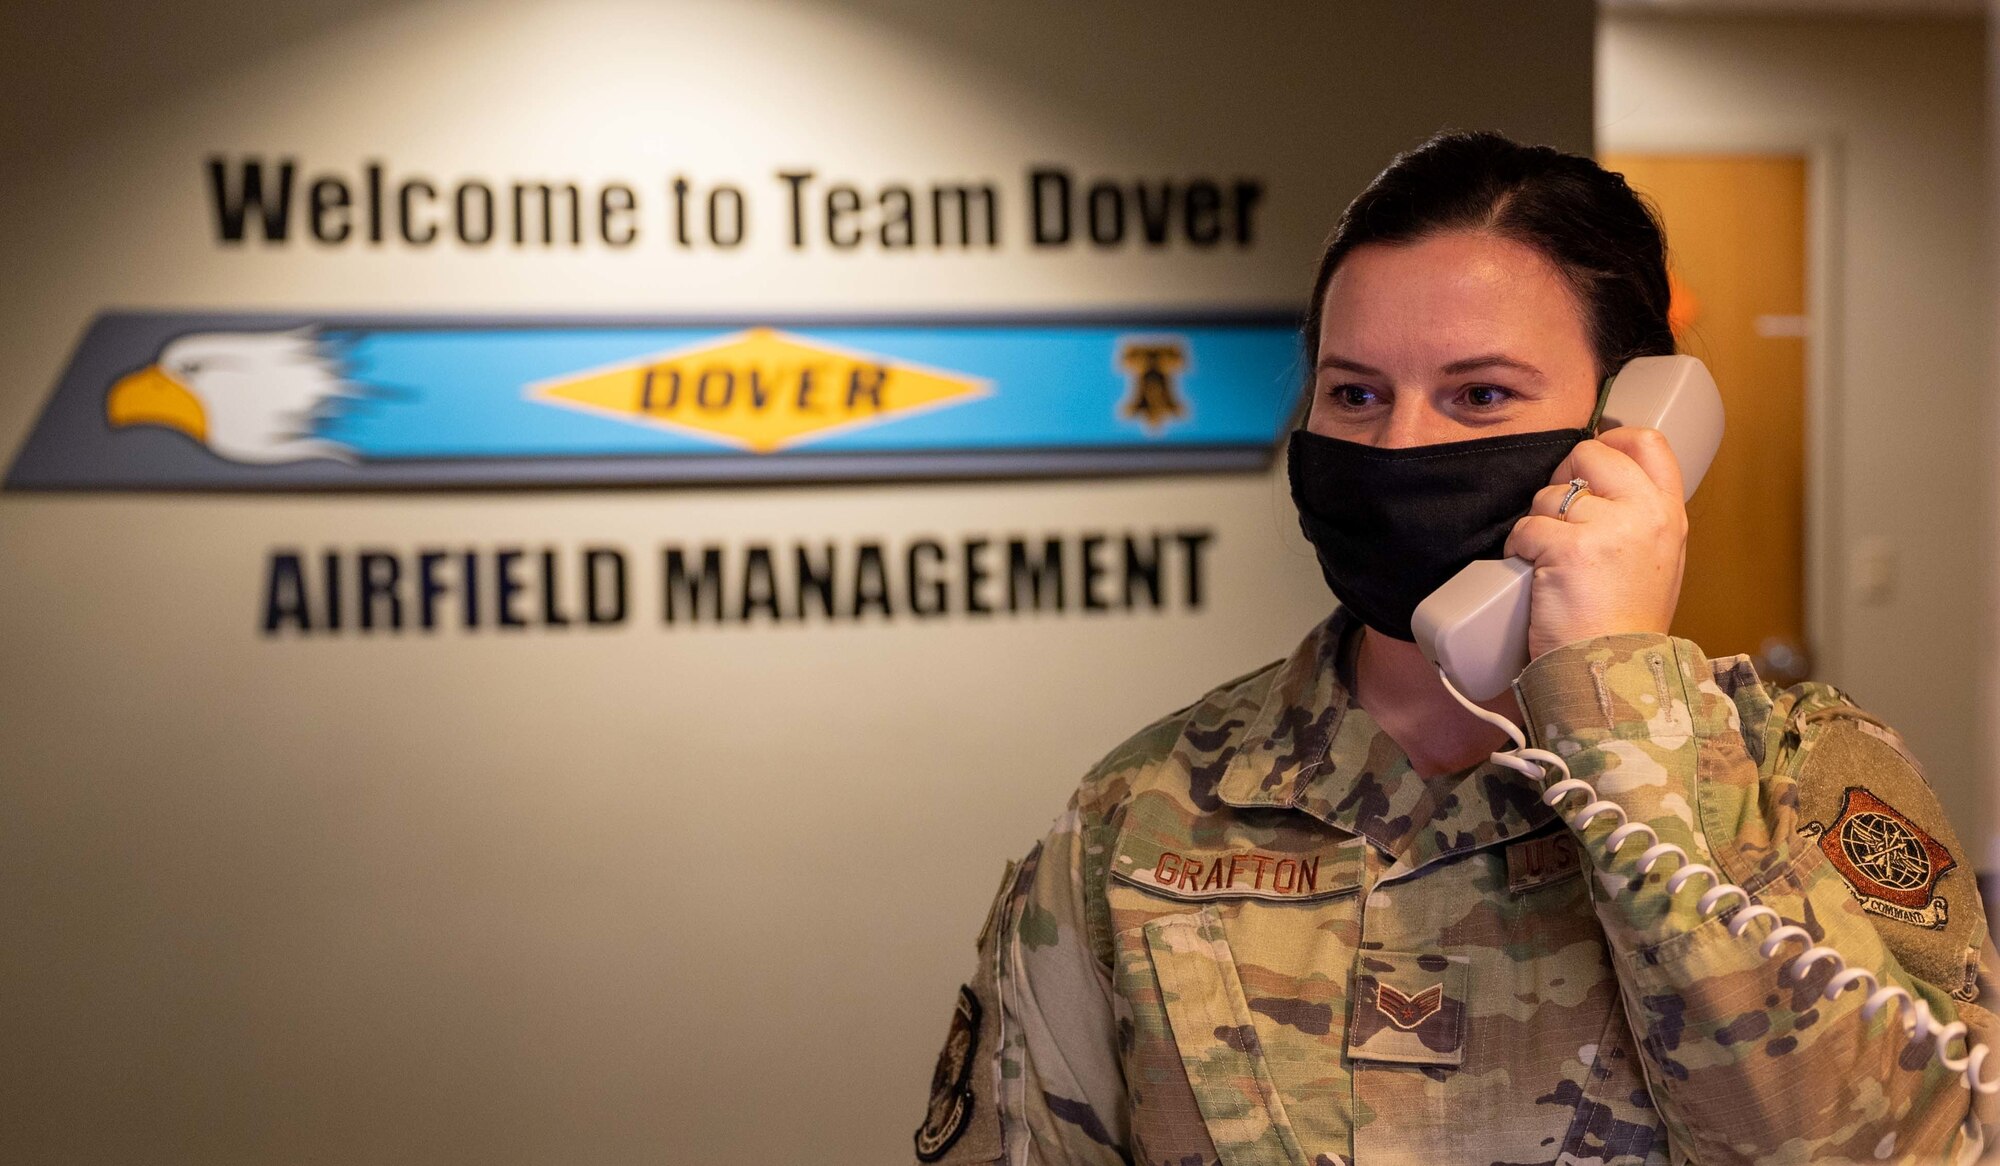 Senior Airman Kristina Grafton, 436th Operation Support Squadron airfield management operations supervisor, tests the base crash phone at Dover Air Force Base, Delaware, Jan. 14, 2021. As an airfield management journeyman, Grafton manages airfield operations, which includes coordinating with civil engineers, safety, air traffic control and various other base agencies to ensure safe aircraft operations within the airfield of Dover AFB. Airfield management is responsible for conducting daily tests of the crash telephone network. (U.S. Air Force photo by Airman 1st Class Faith Schaefer)